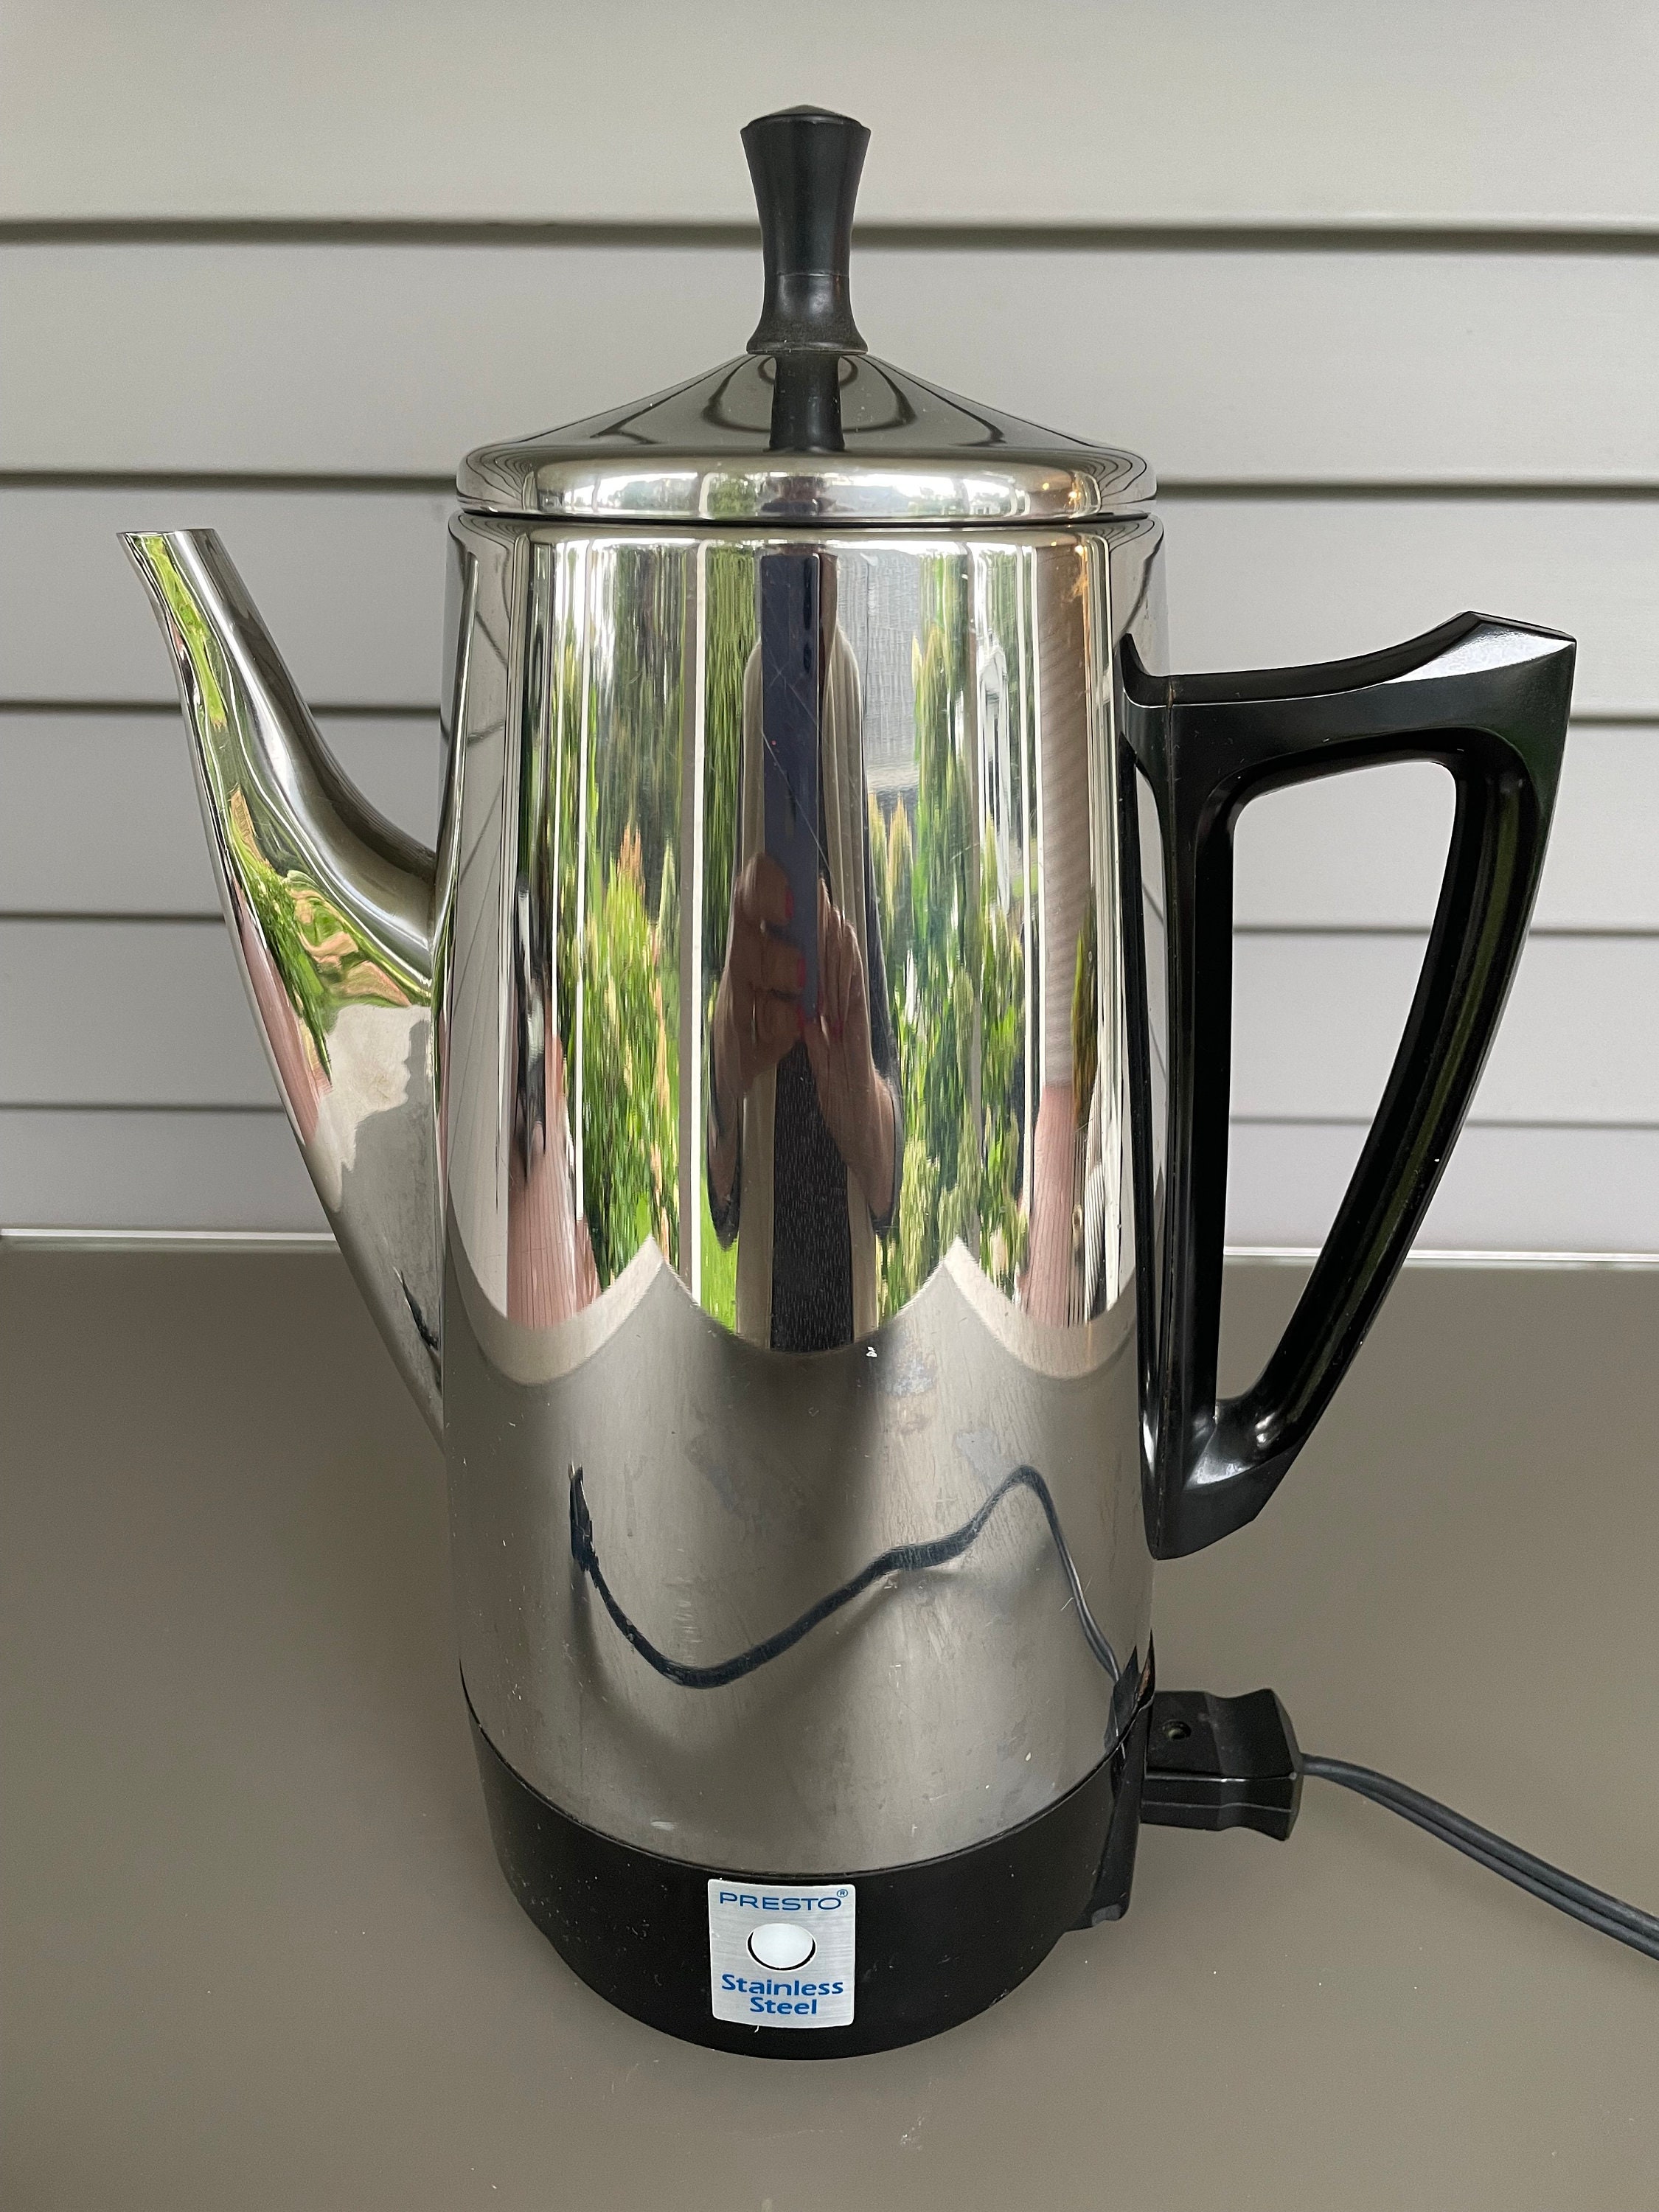 Presto Stainless Steel 12 Cup Percolator, Mid Century Electric